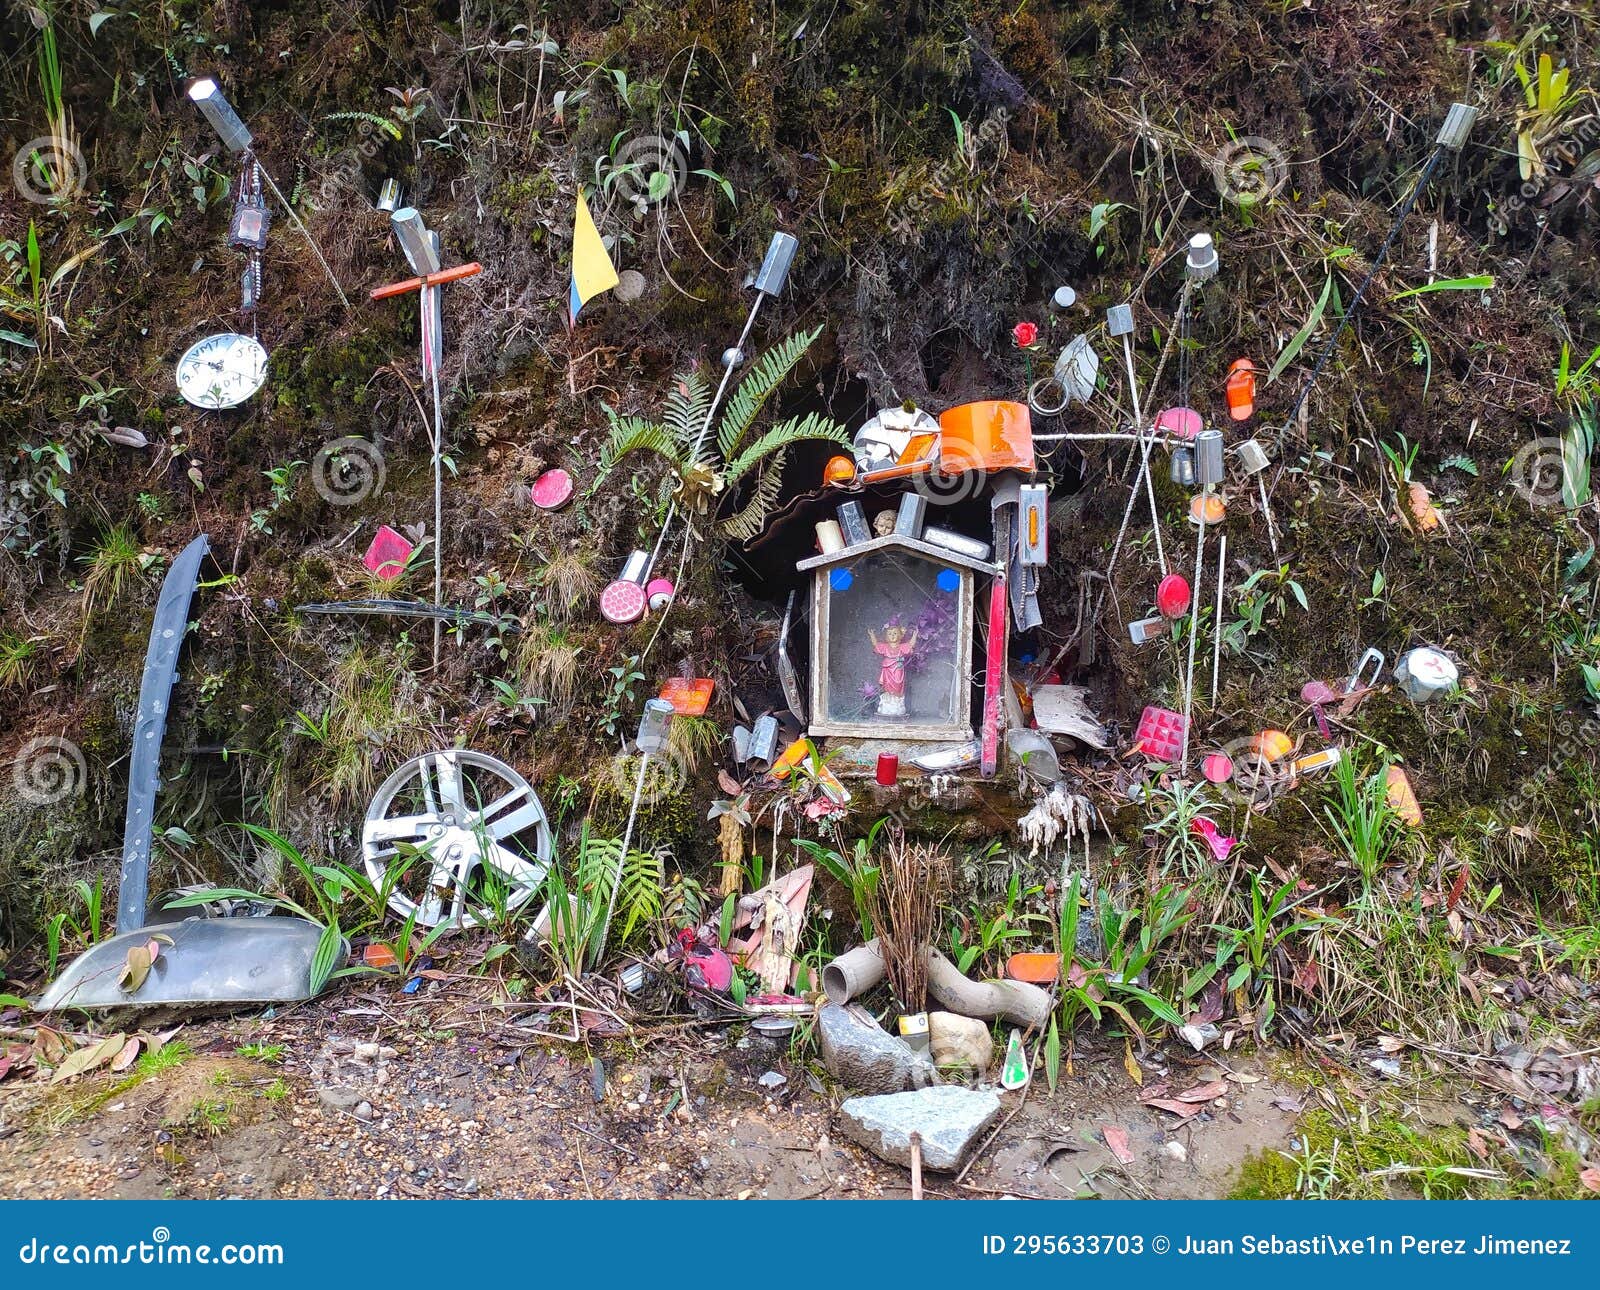 altar to the divino niÃ±o, including rims, mufflers, and other vehicle parts.